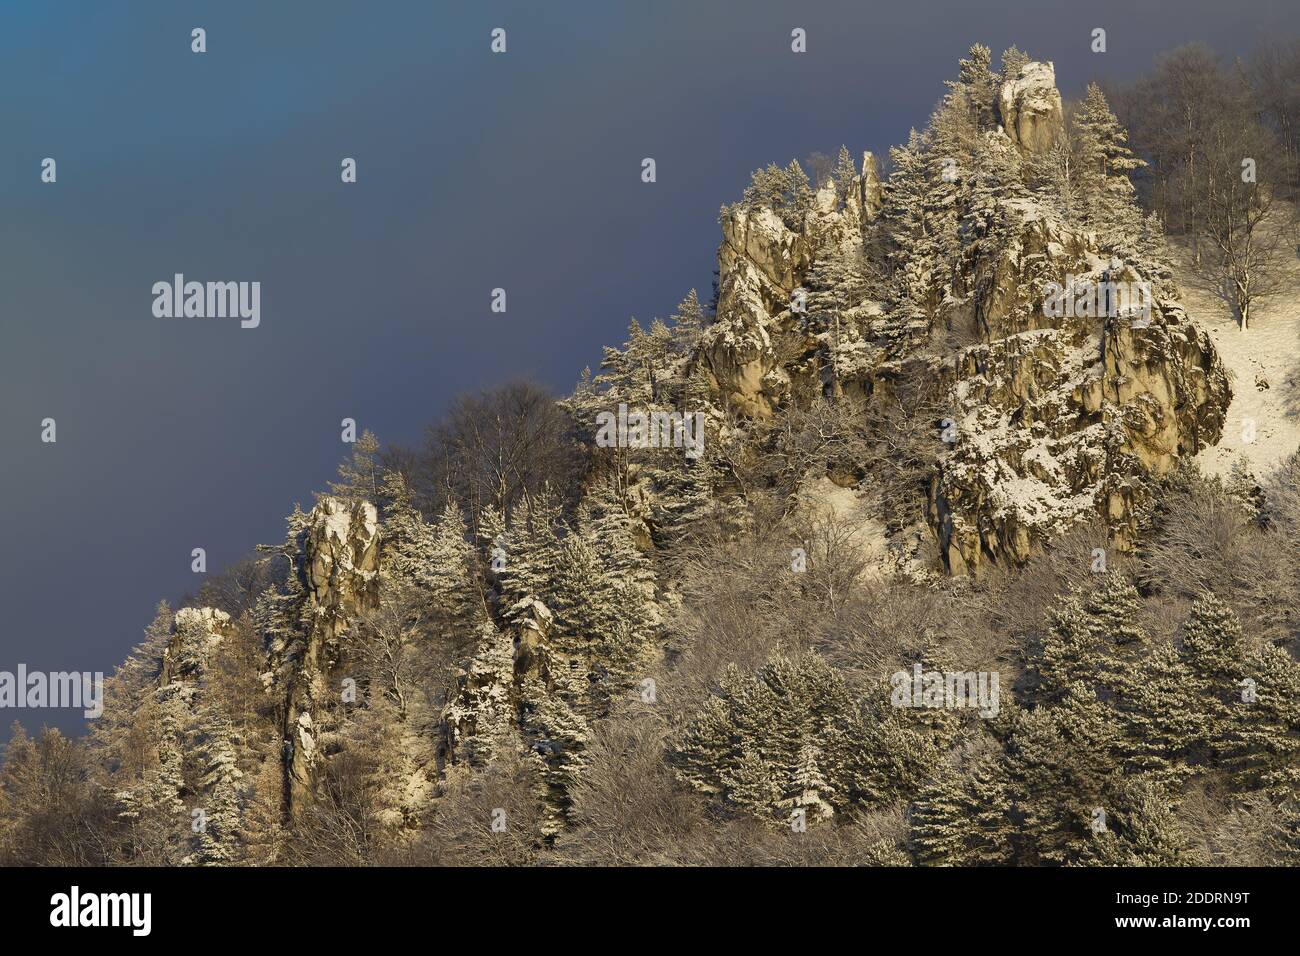 Rocky hill side with pine trees growing on it covered with snow in winter Stock Photo